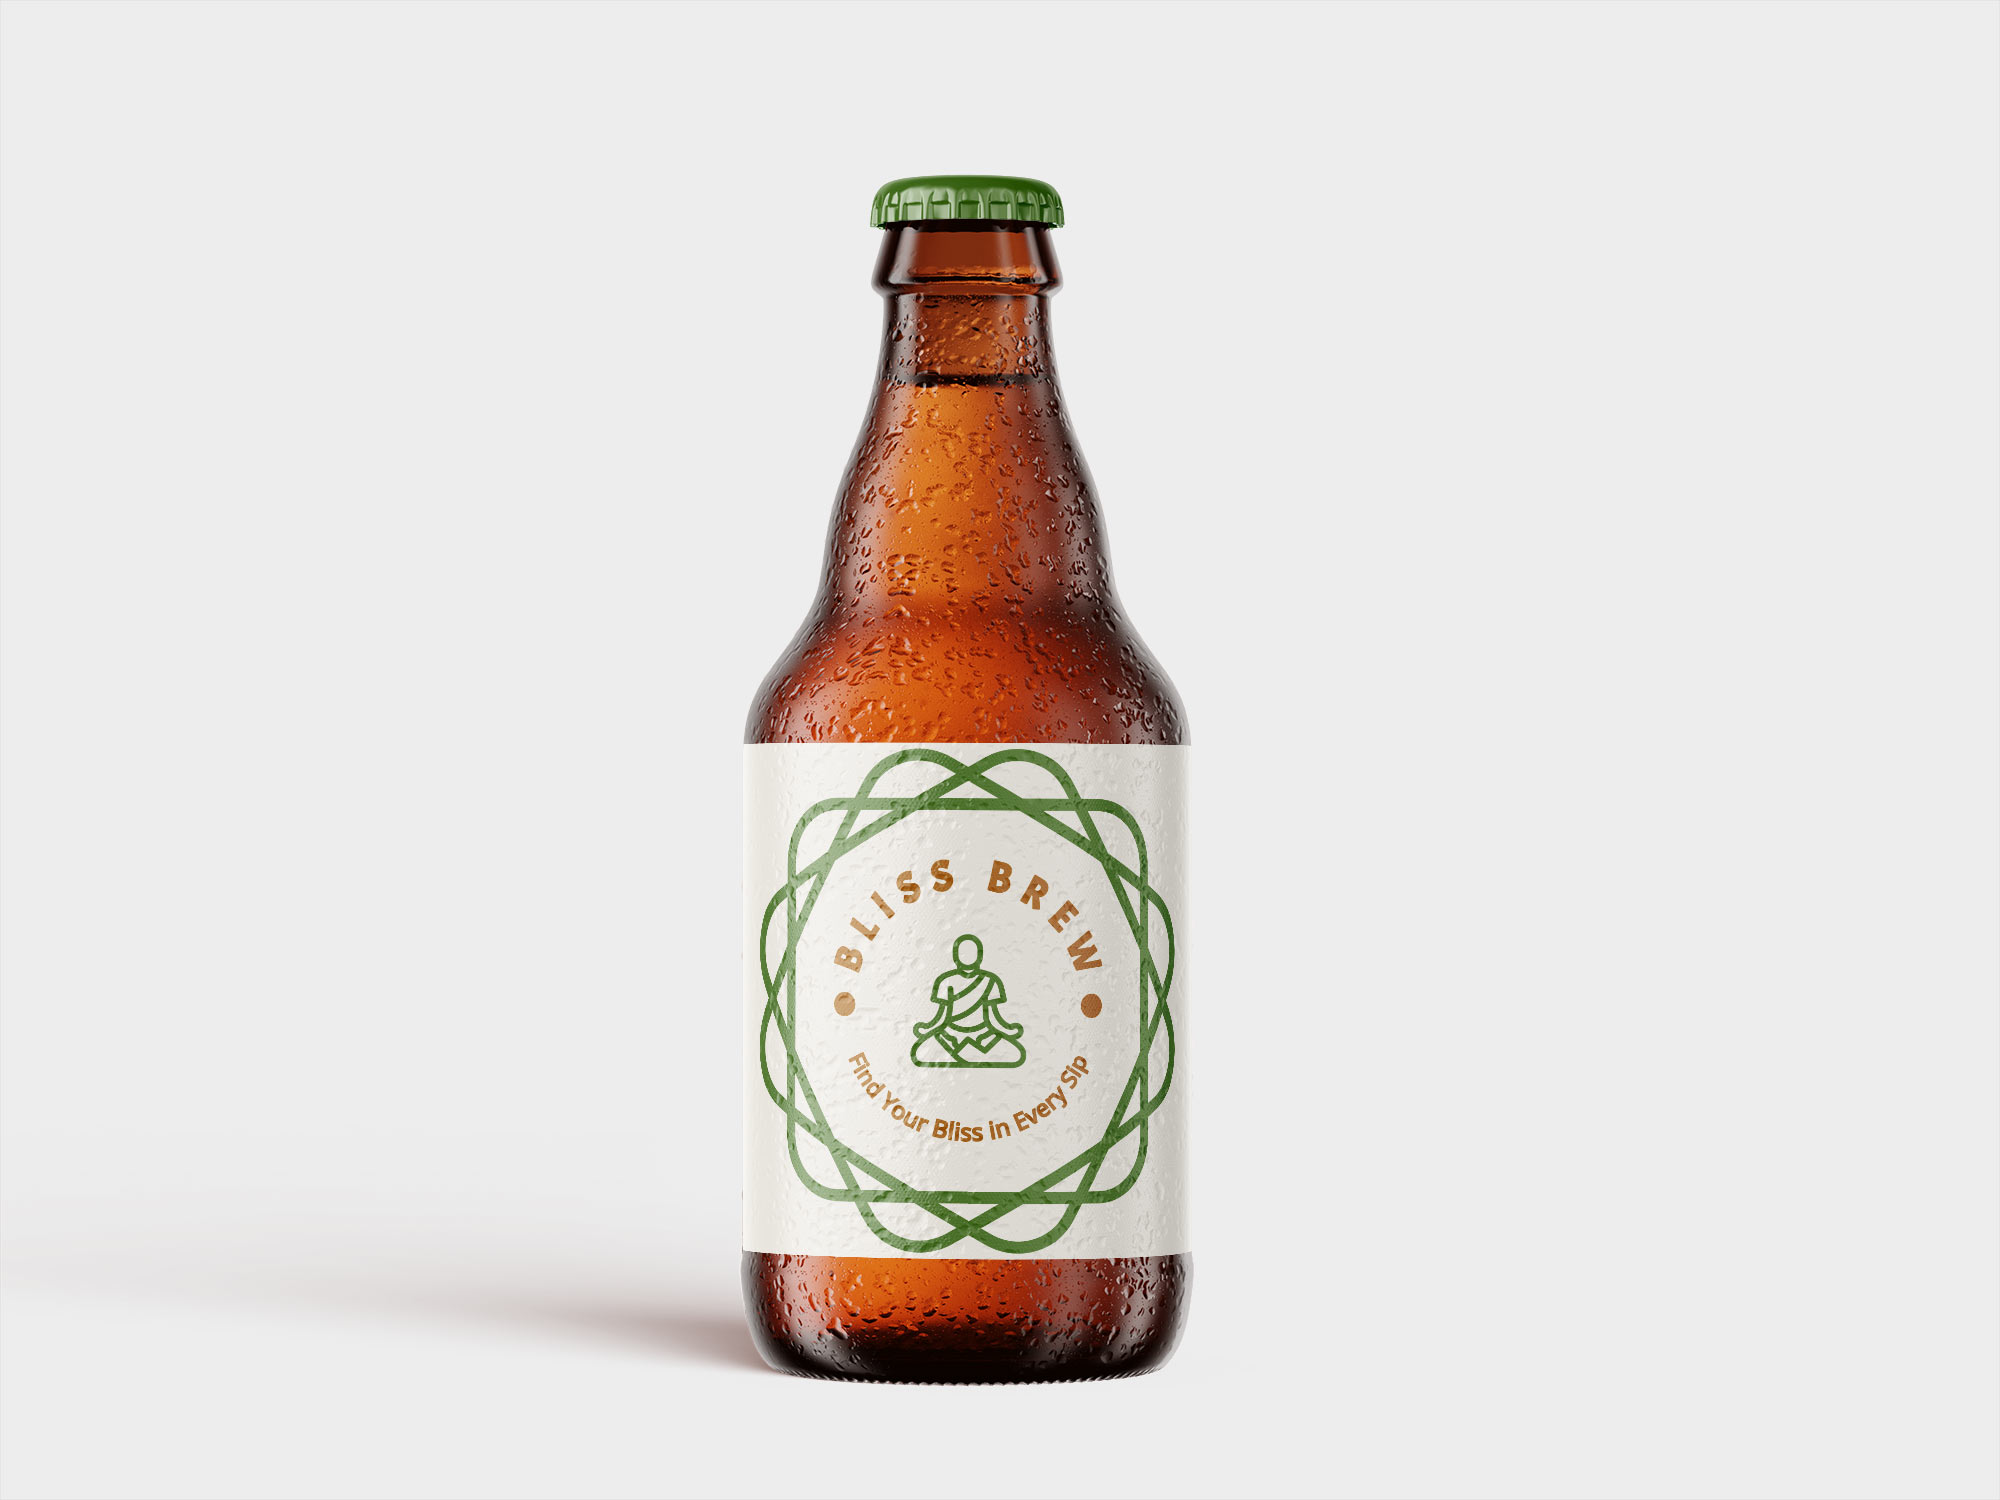 A beer bottle with a logo on it of a person meditating.